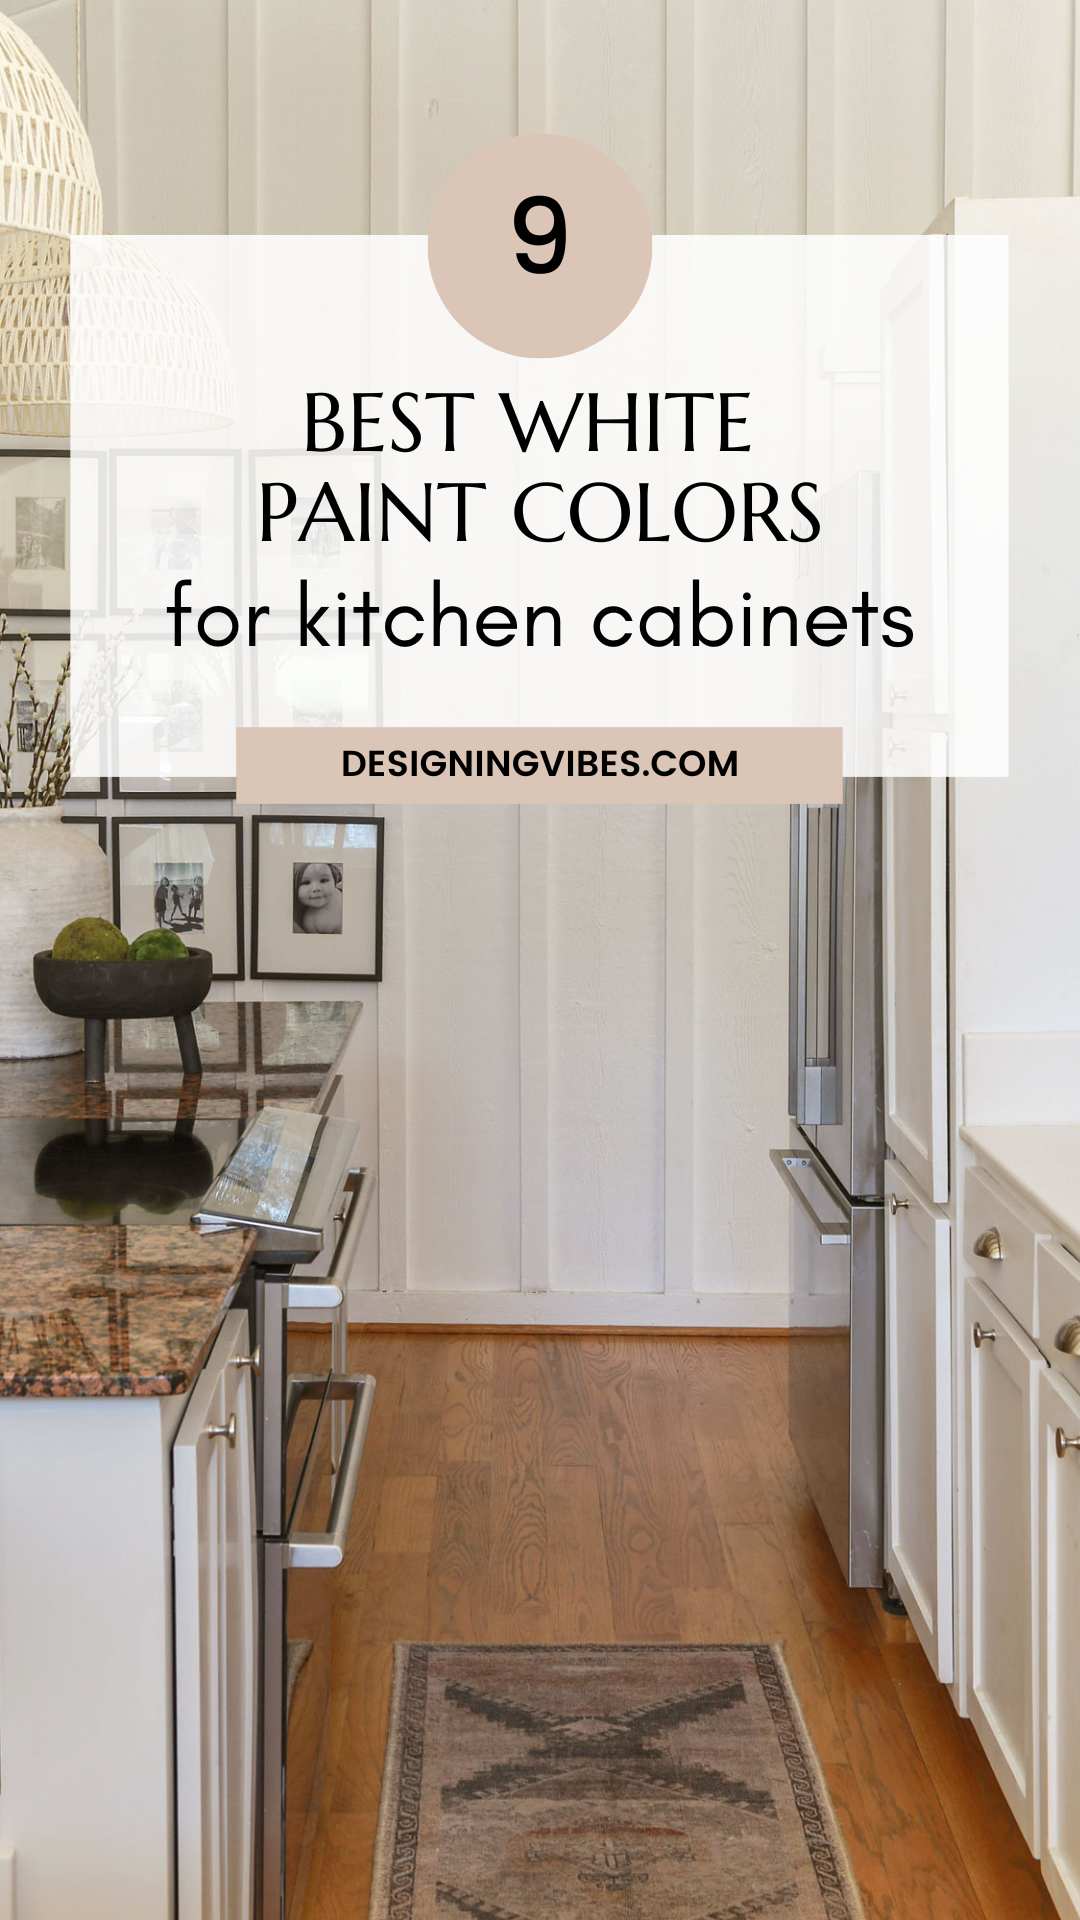 The Best Neutral Paint Colors for Kitchens